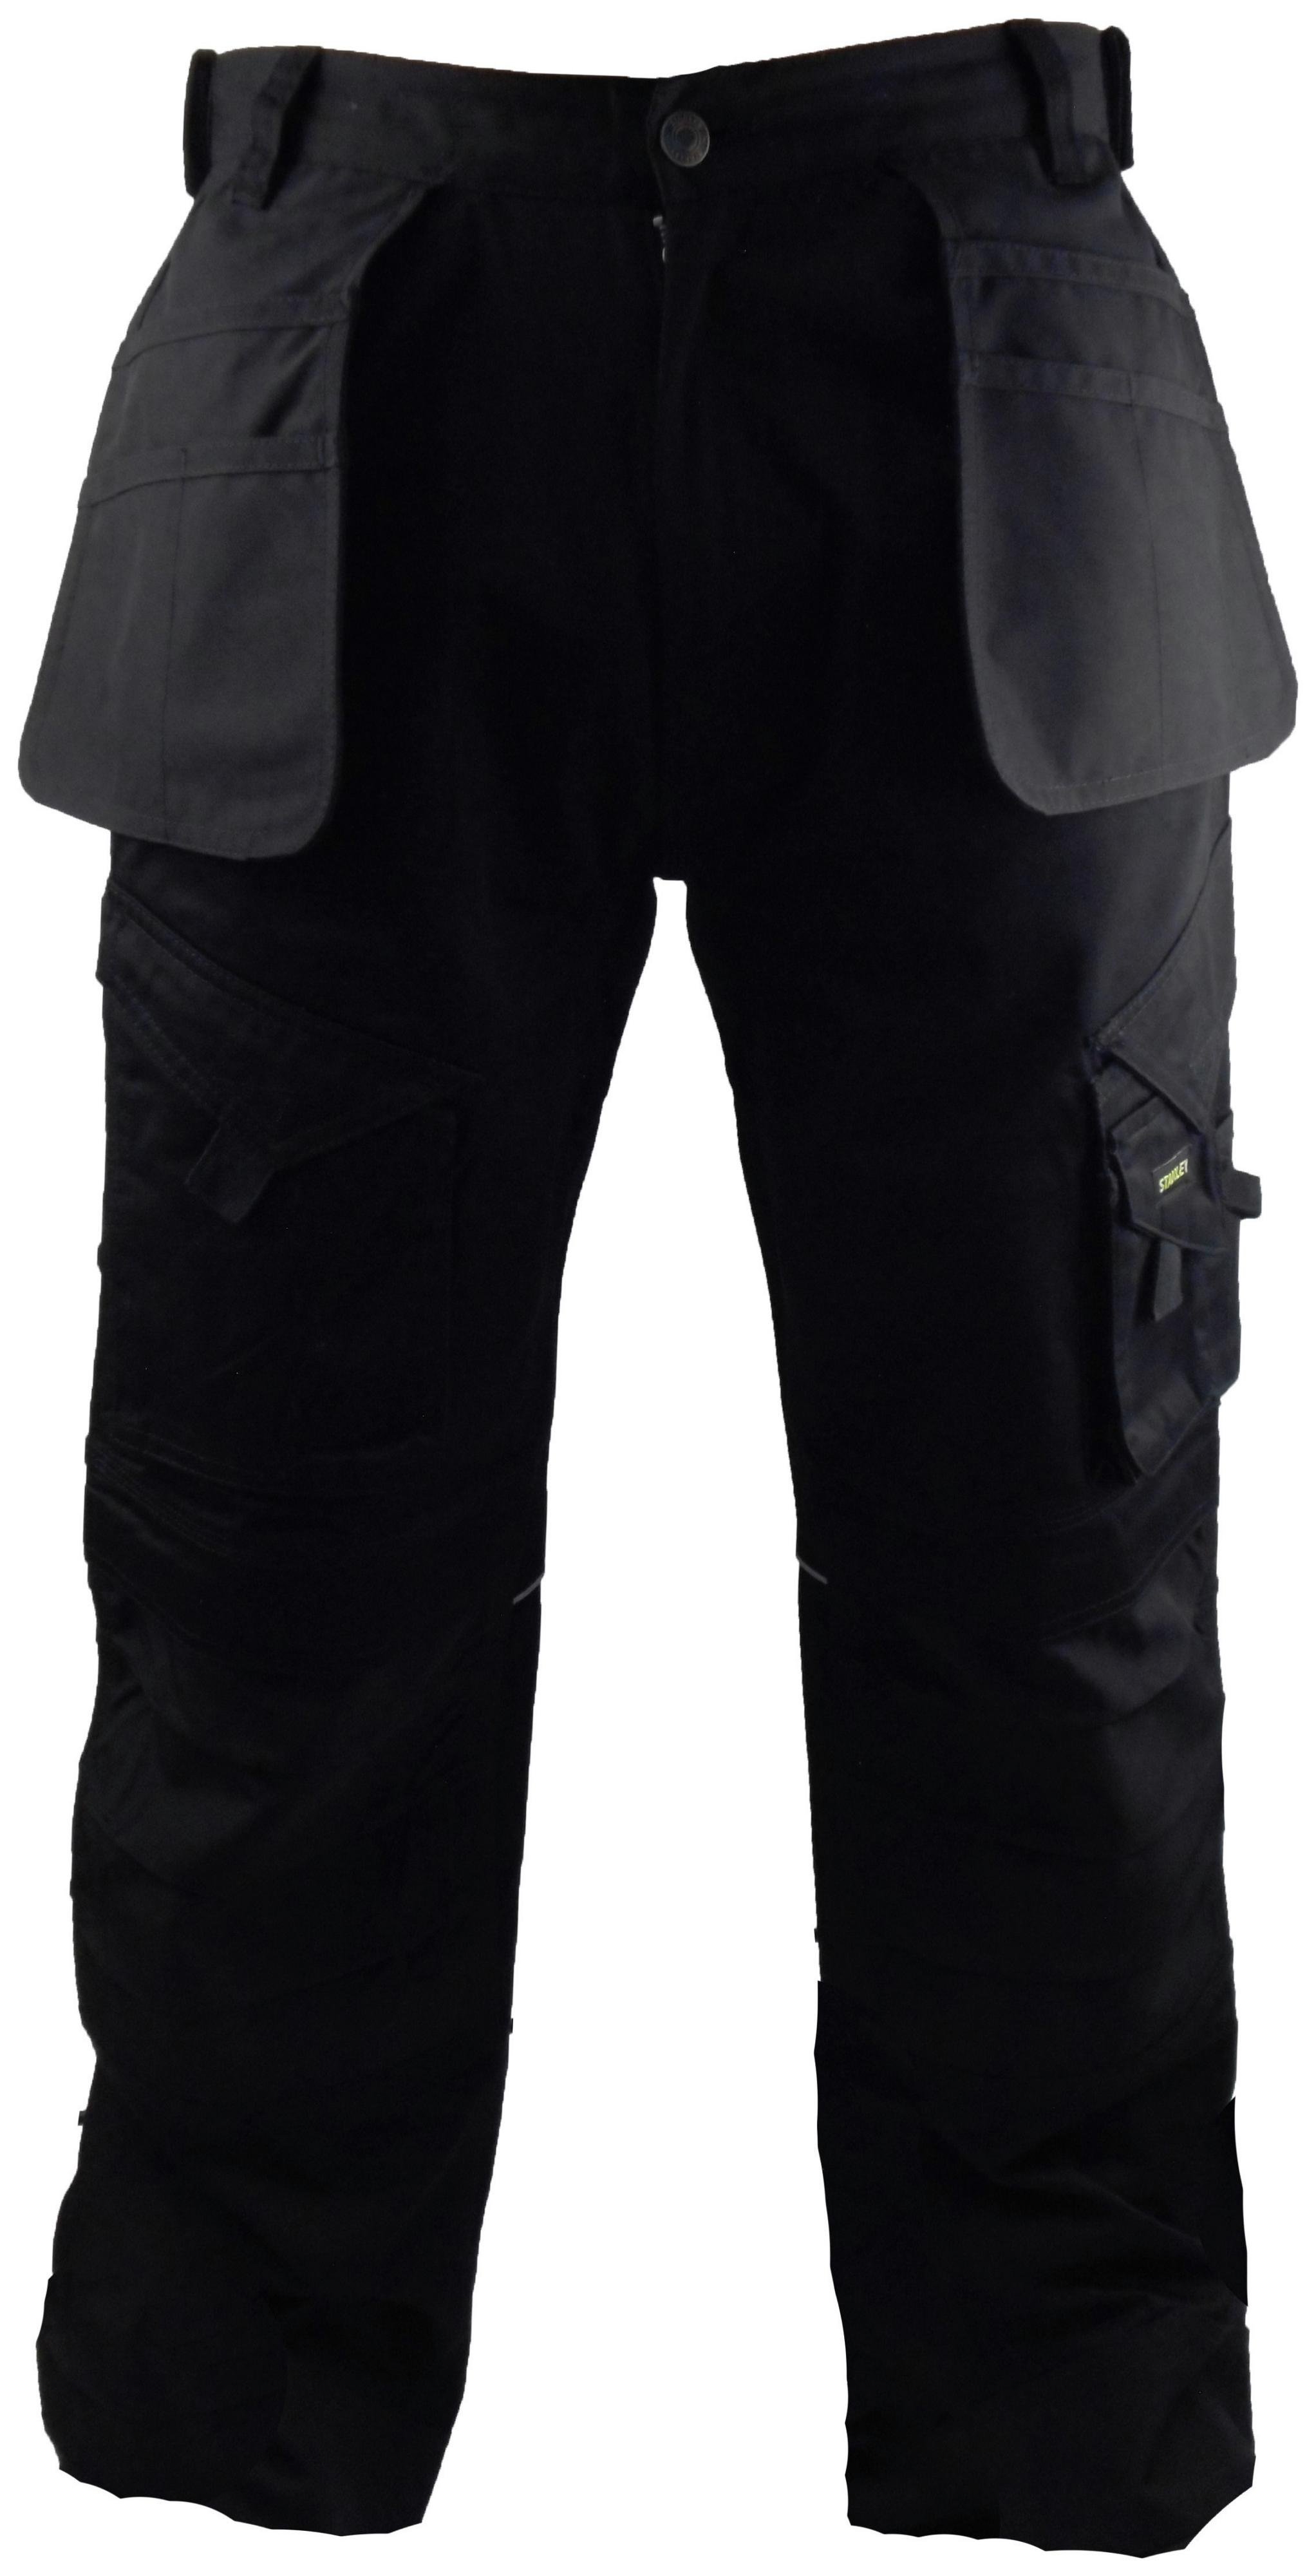 Stanley Colorado Men's Black Trouser - 33 to 38 inch. Review